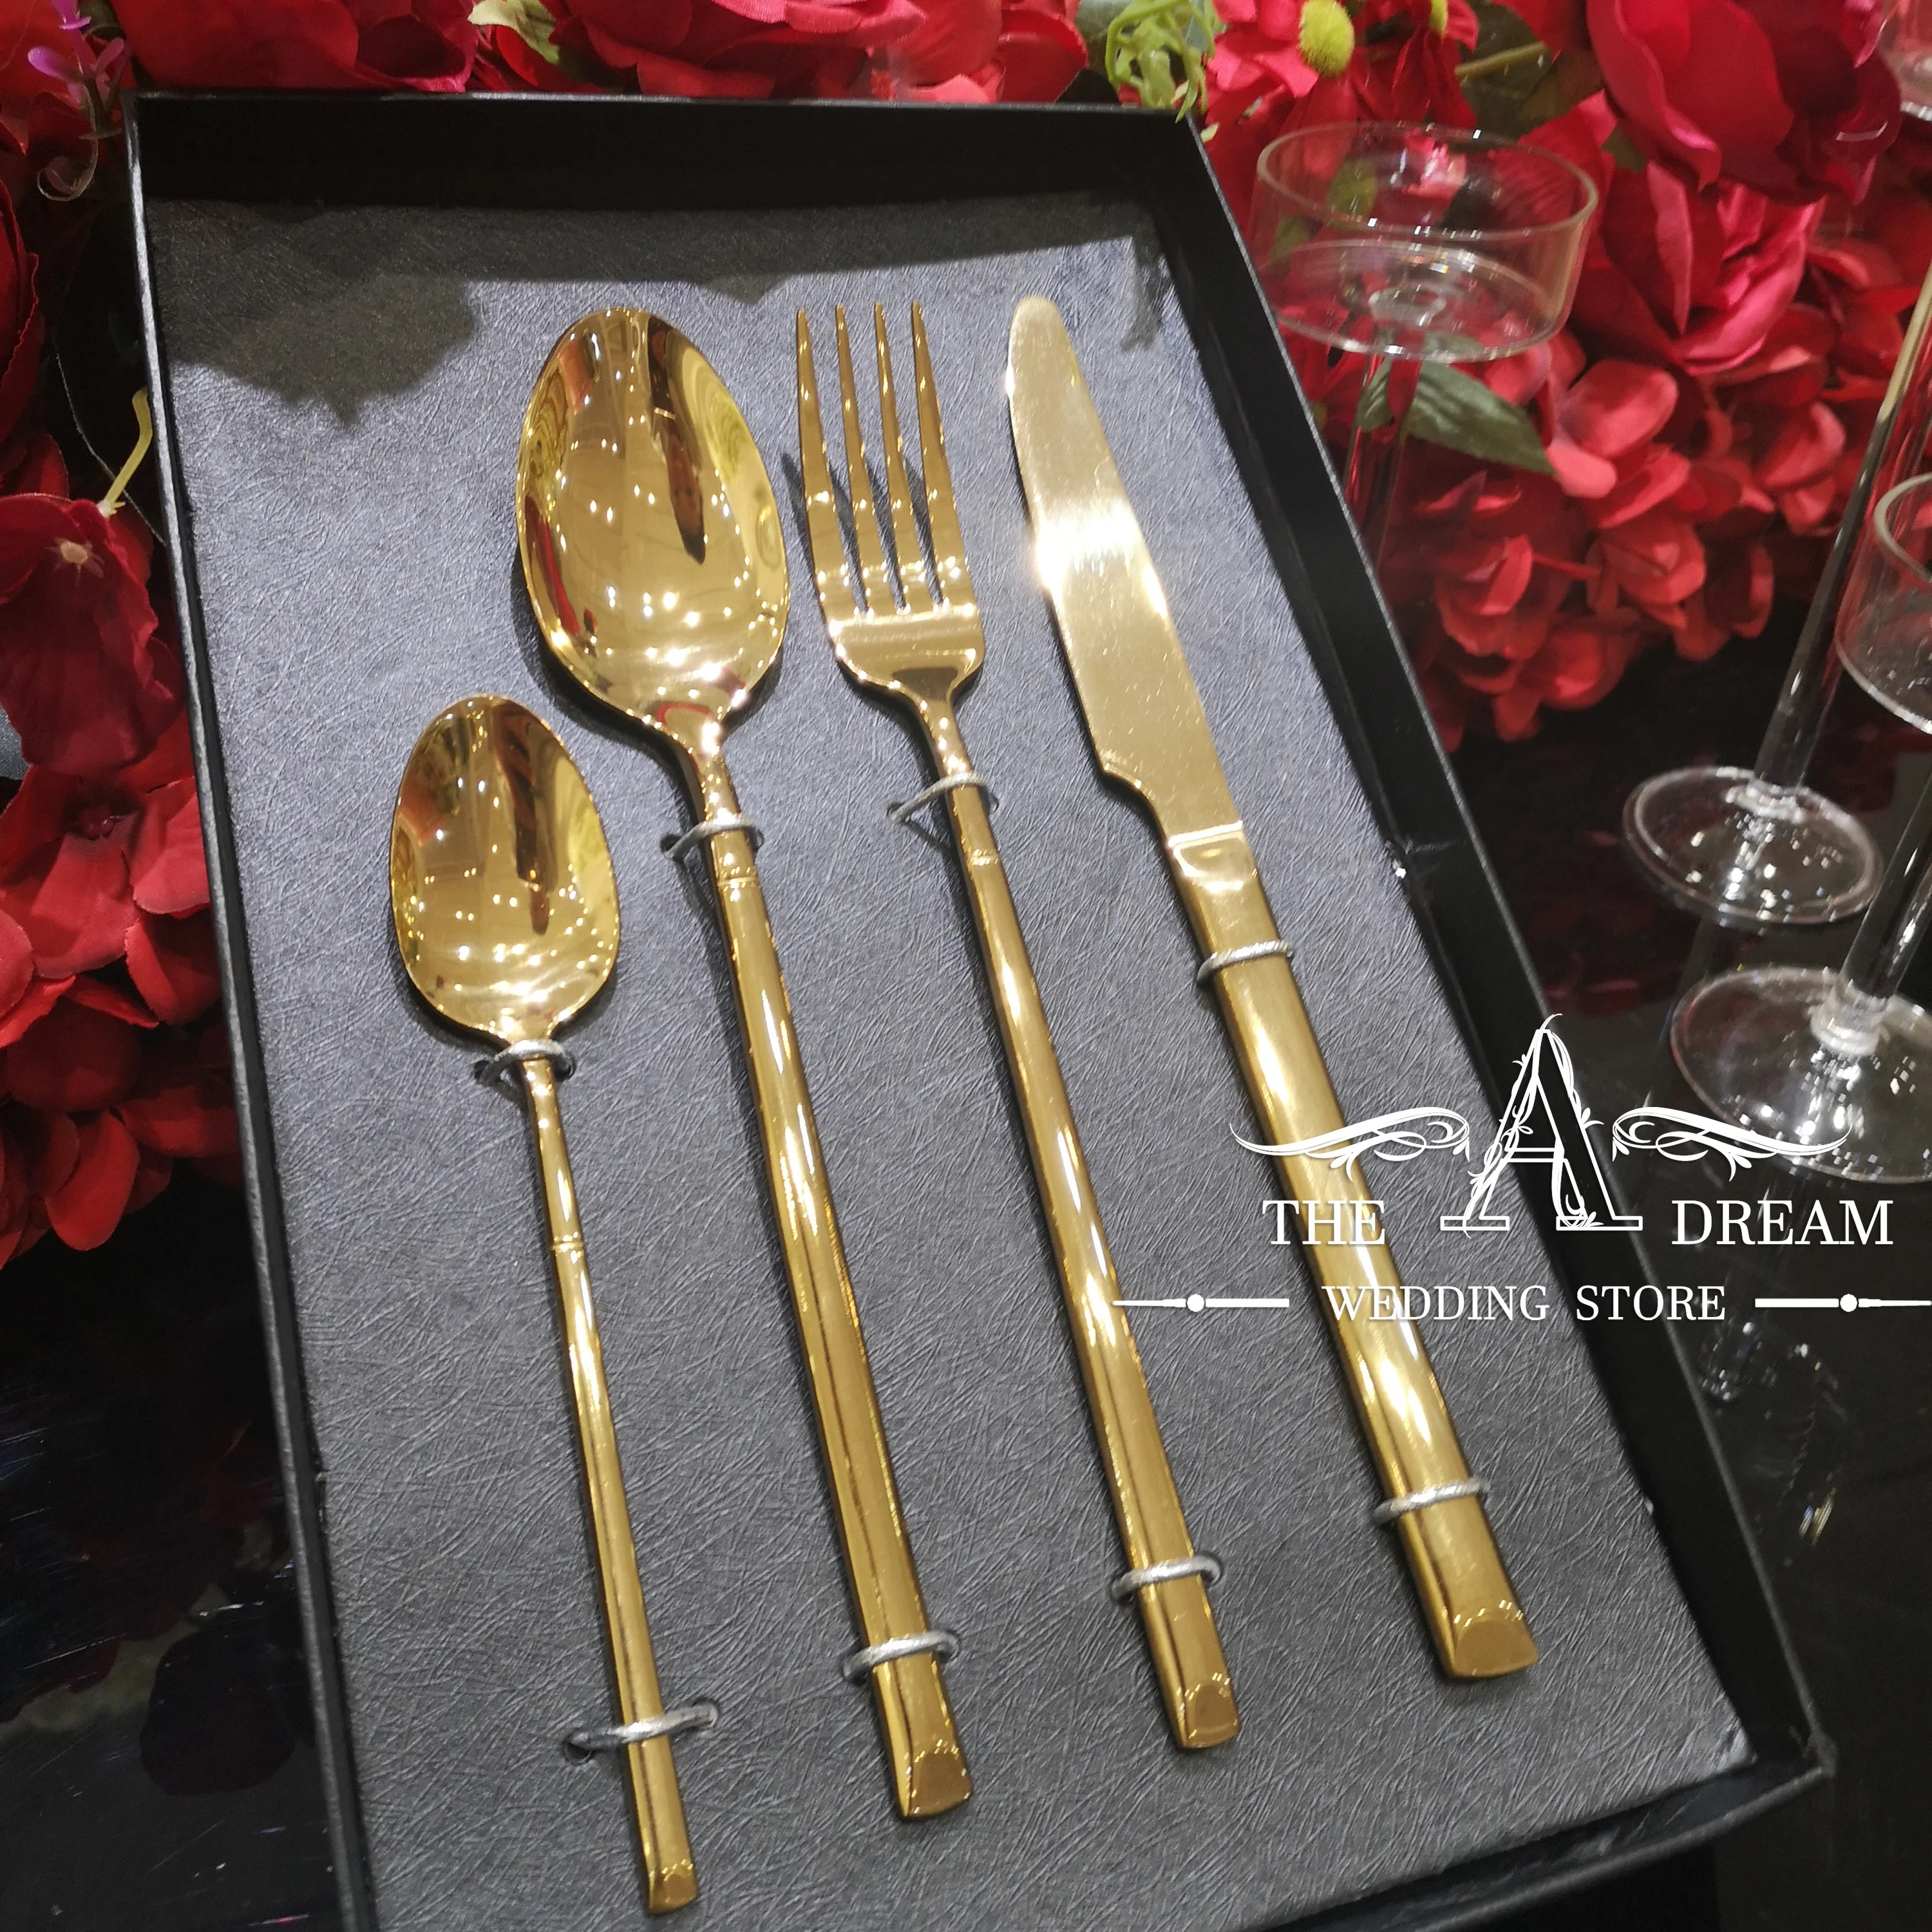 

CTL04-GM Classic Gold Wedding Cutlery Set Modern Tableware With Gold Fork Spoon Set / Cuchilleria From The A Dream Wedding Store